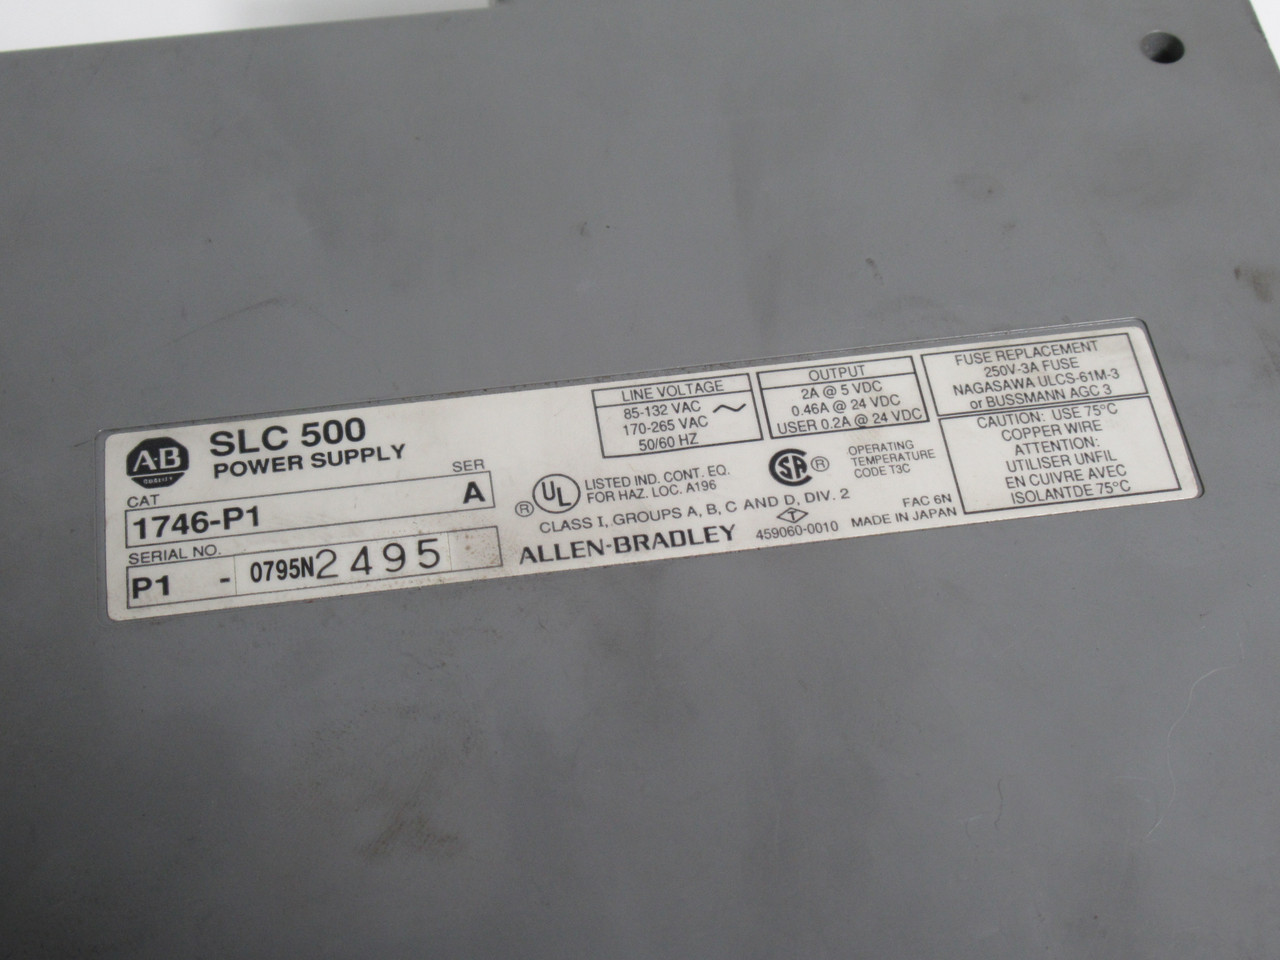 Allen-Bradley 1746-P1 Series A Power Supply Outlet 2A @ 5 VDC AS IS